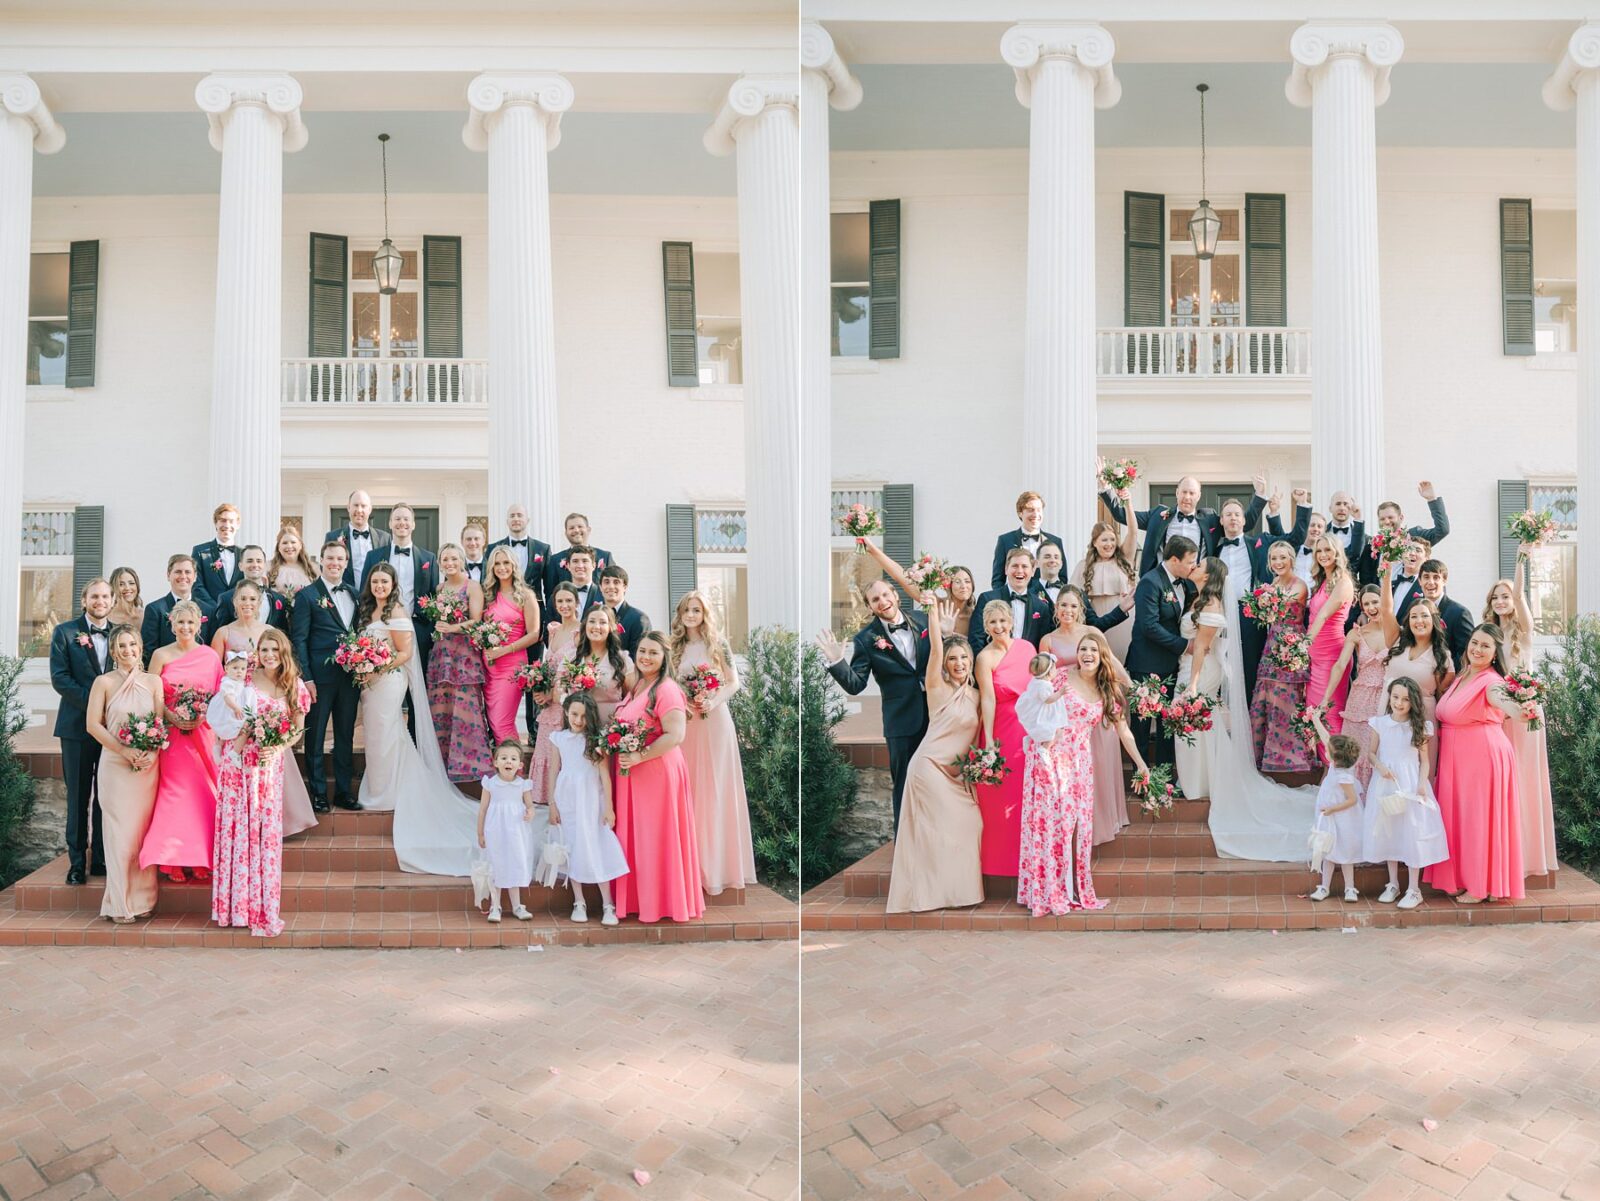 large wedding party, large wedding party posing ideas, twenty four wedding party, front porch at woodbine mansion, historic wedding venue. wedding at Woodbine mansion in round rock texas, wedding photos by austin wedding photography Tara Lyons Photography, planning by The event shop